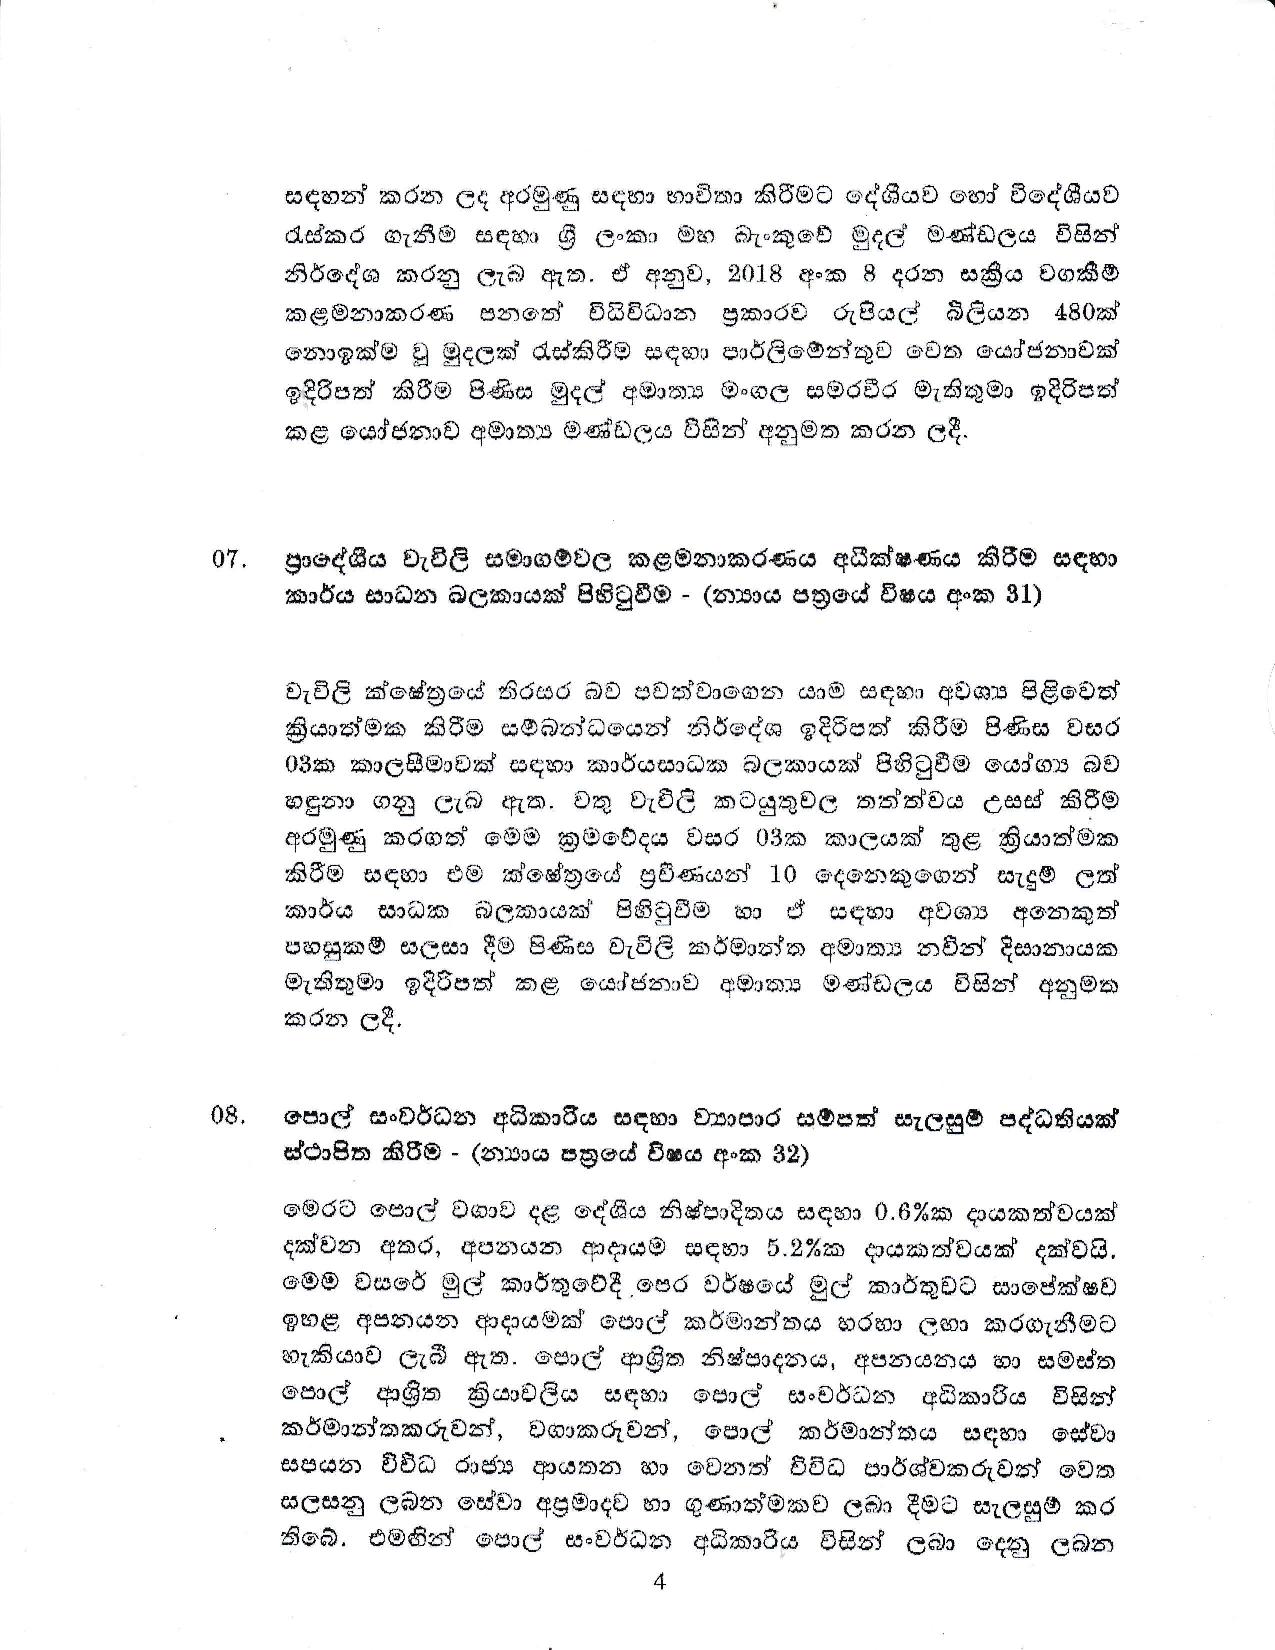 Cabinet Decision on 18.06.2019S page 004